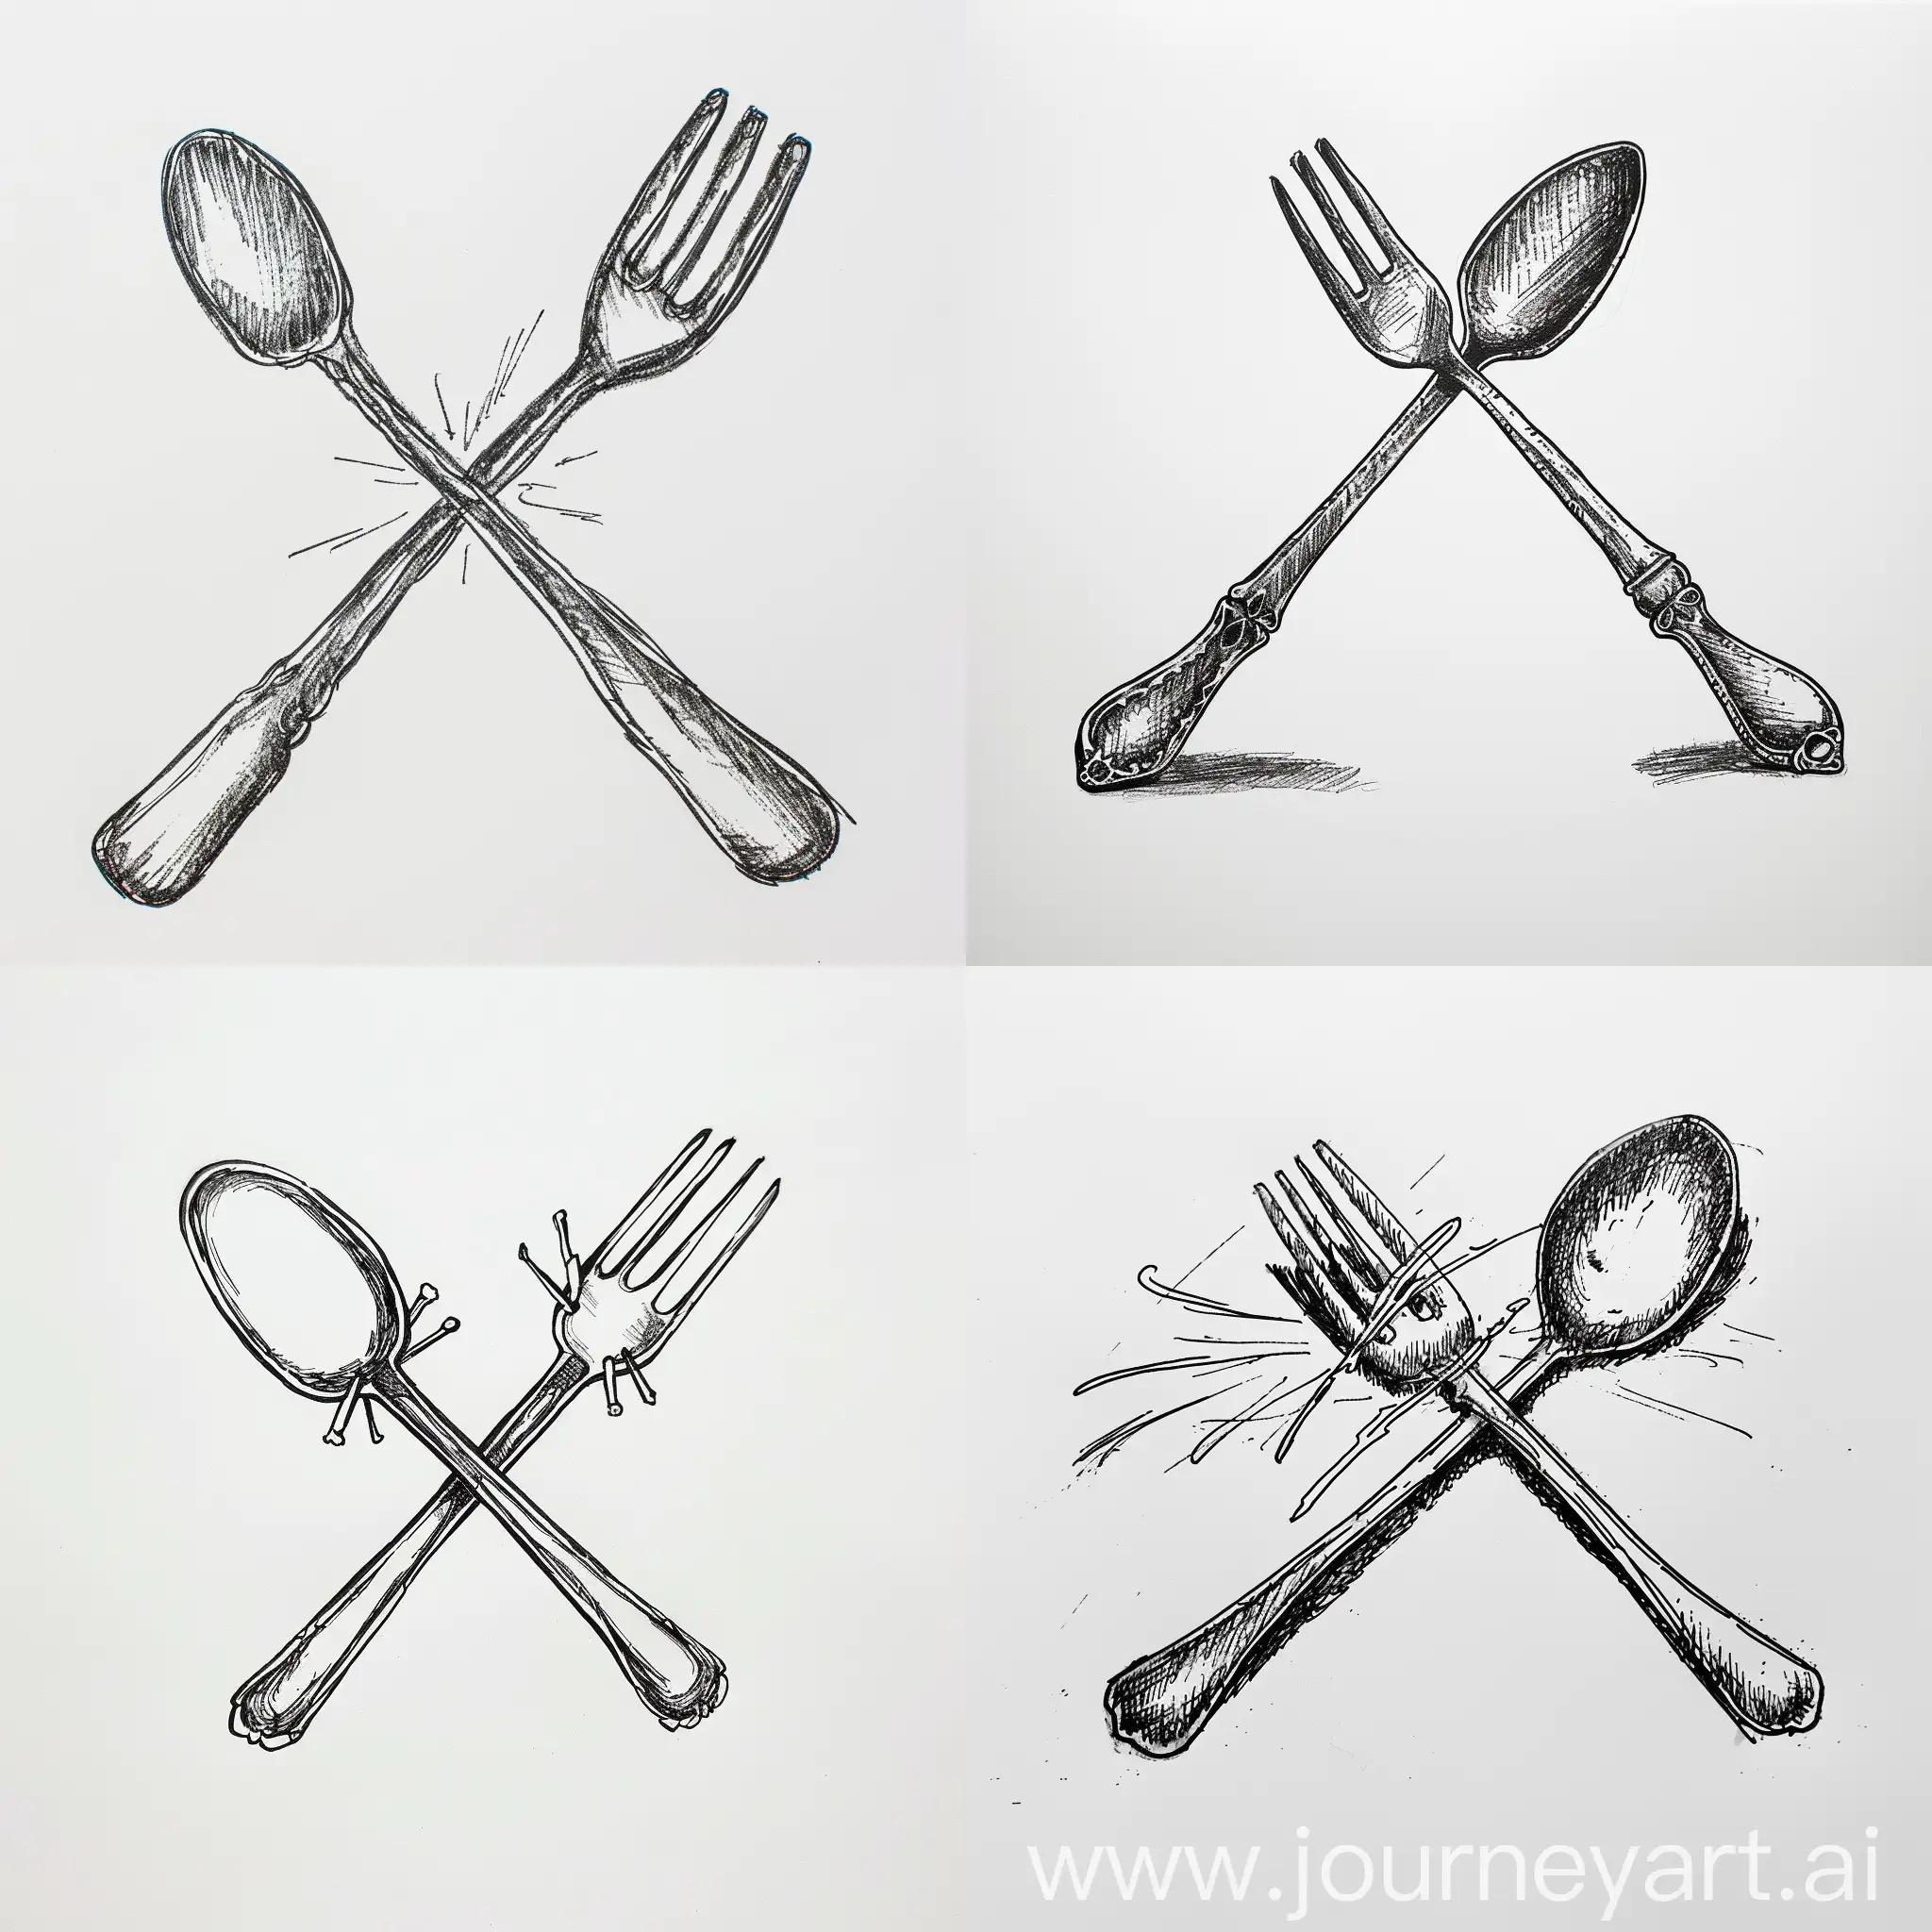 Draw spoon fighting with fork